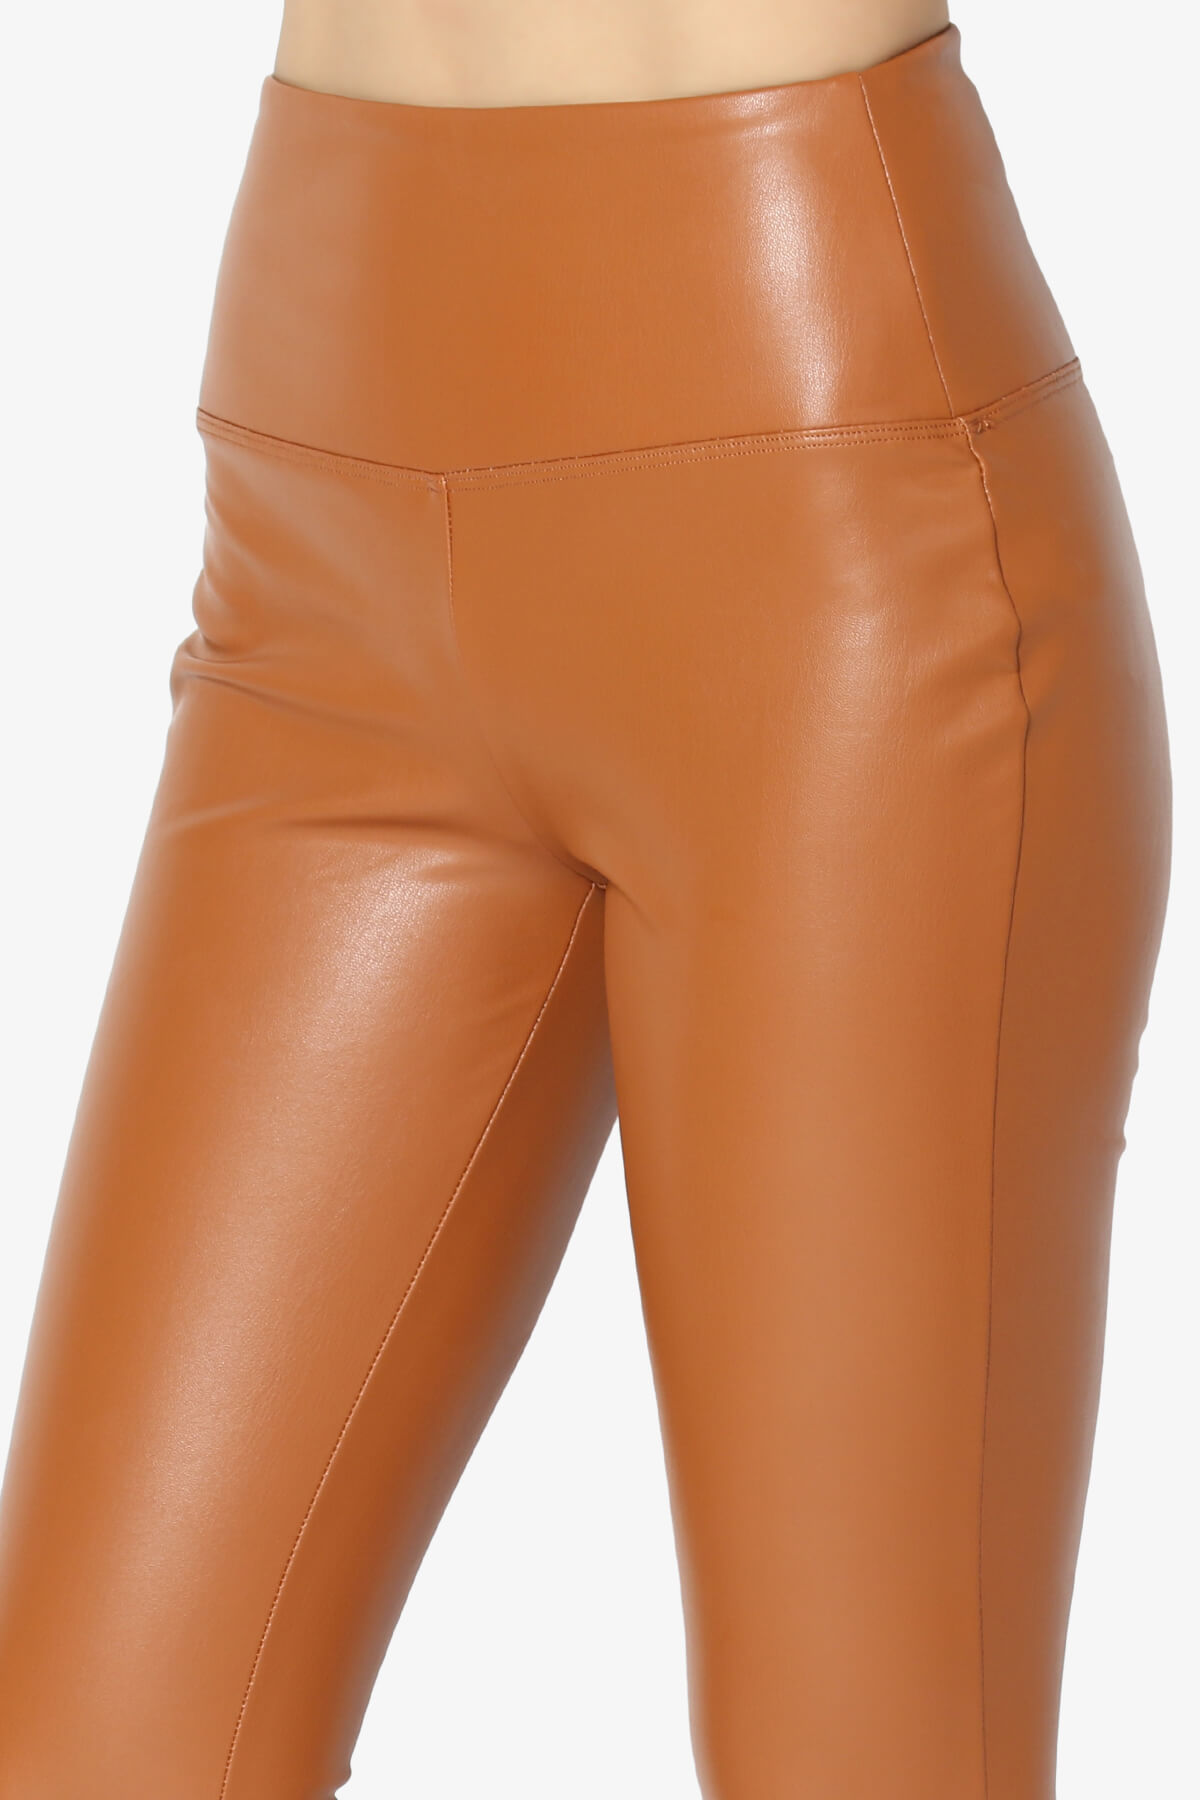 TheMogan Women's Sexy Stretchy Faux Leather Leggings Wide Band High Waist Tights Pants